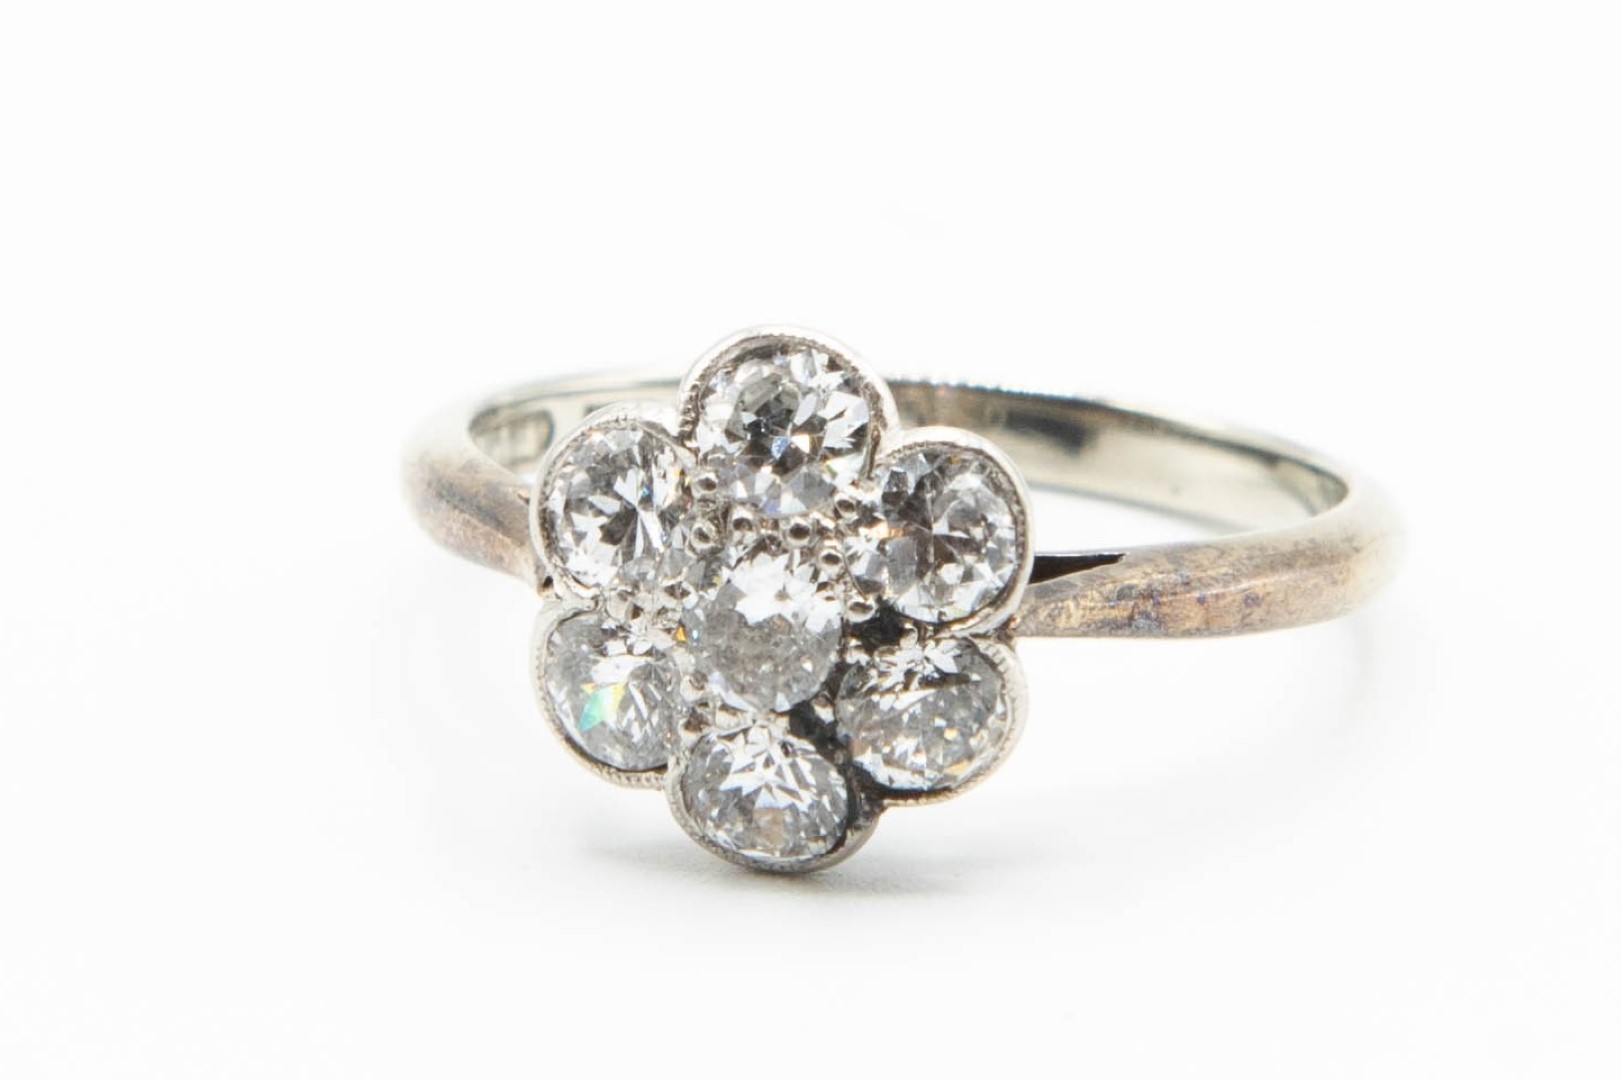 AN 18CT WHITE GOLD AND PLATINUM DIAMOND CLUSTER RING